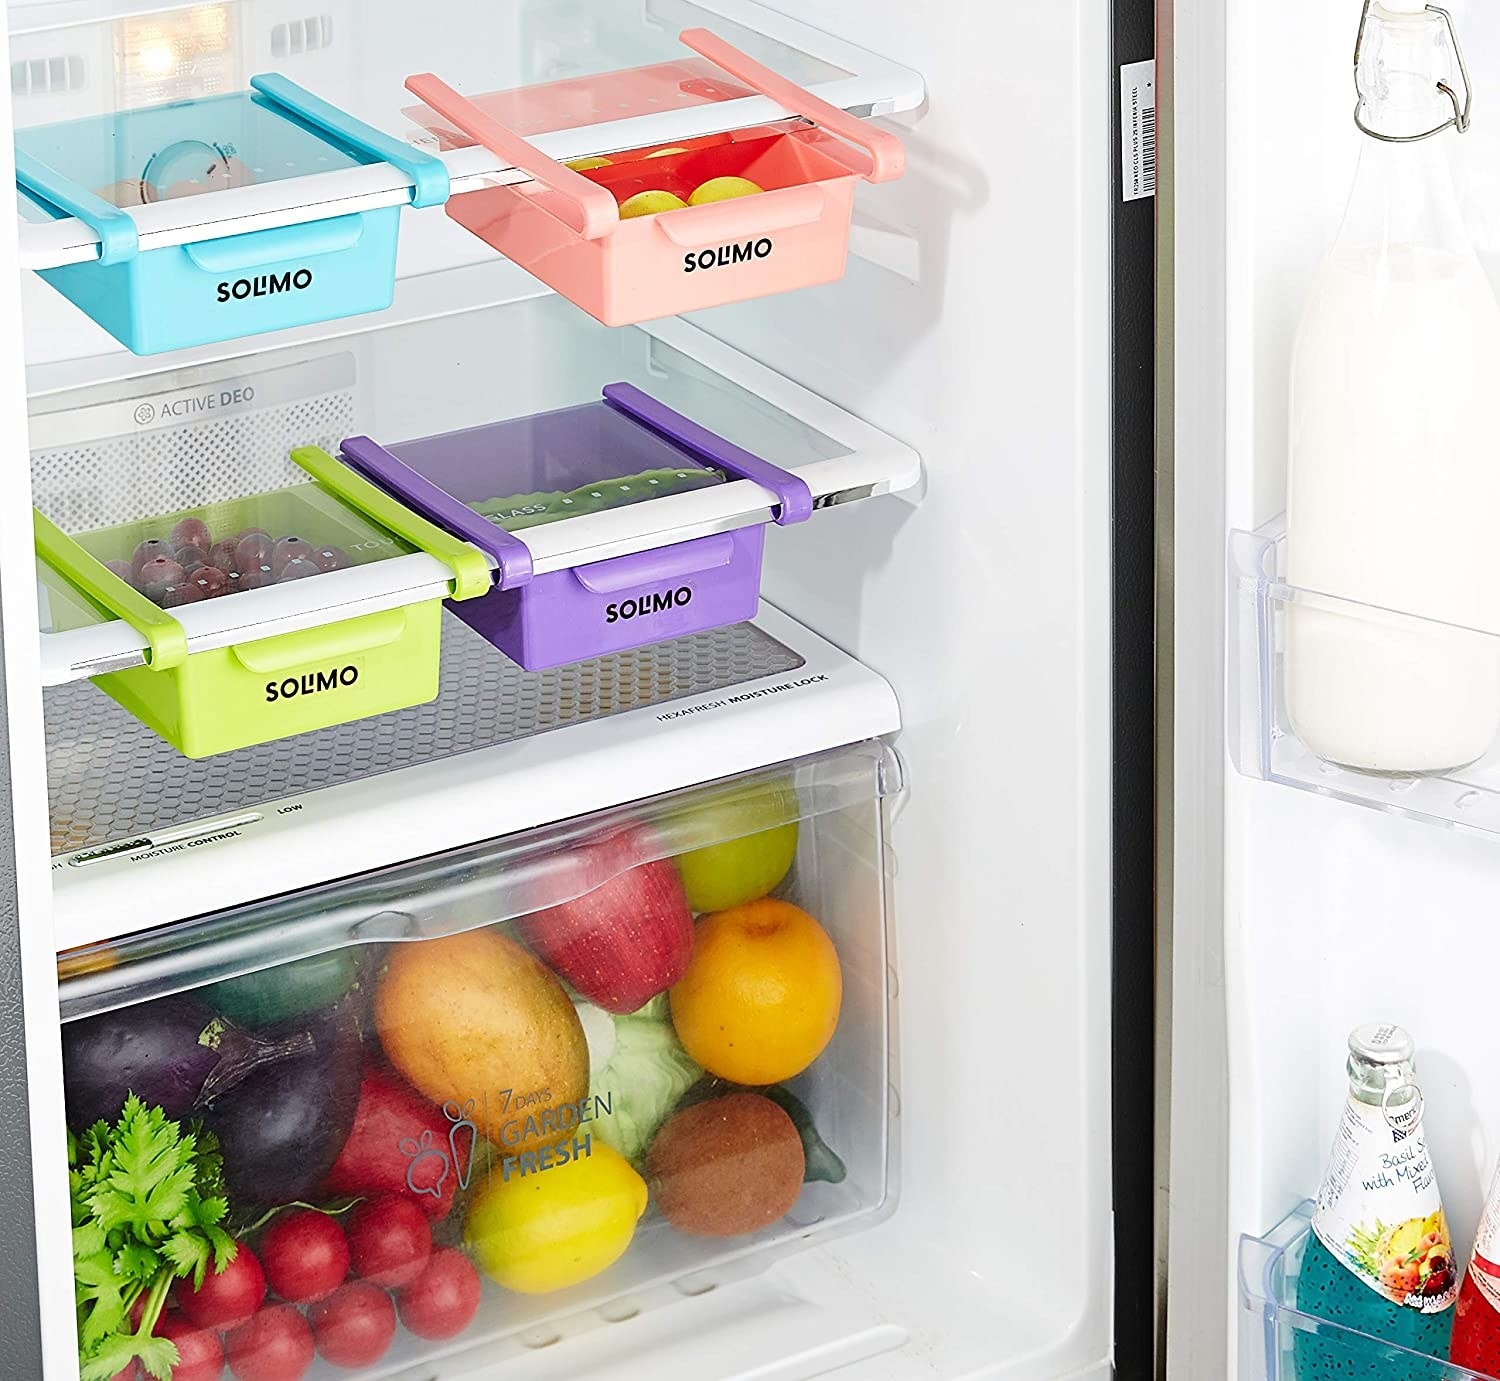 A set of under-shelf organisers with food items in them in a fridge